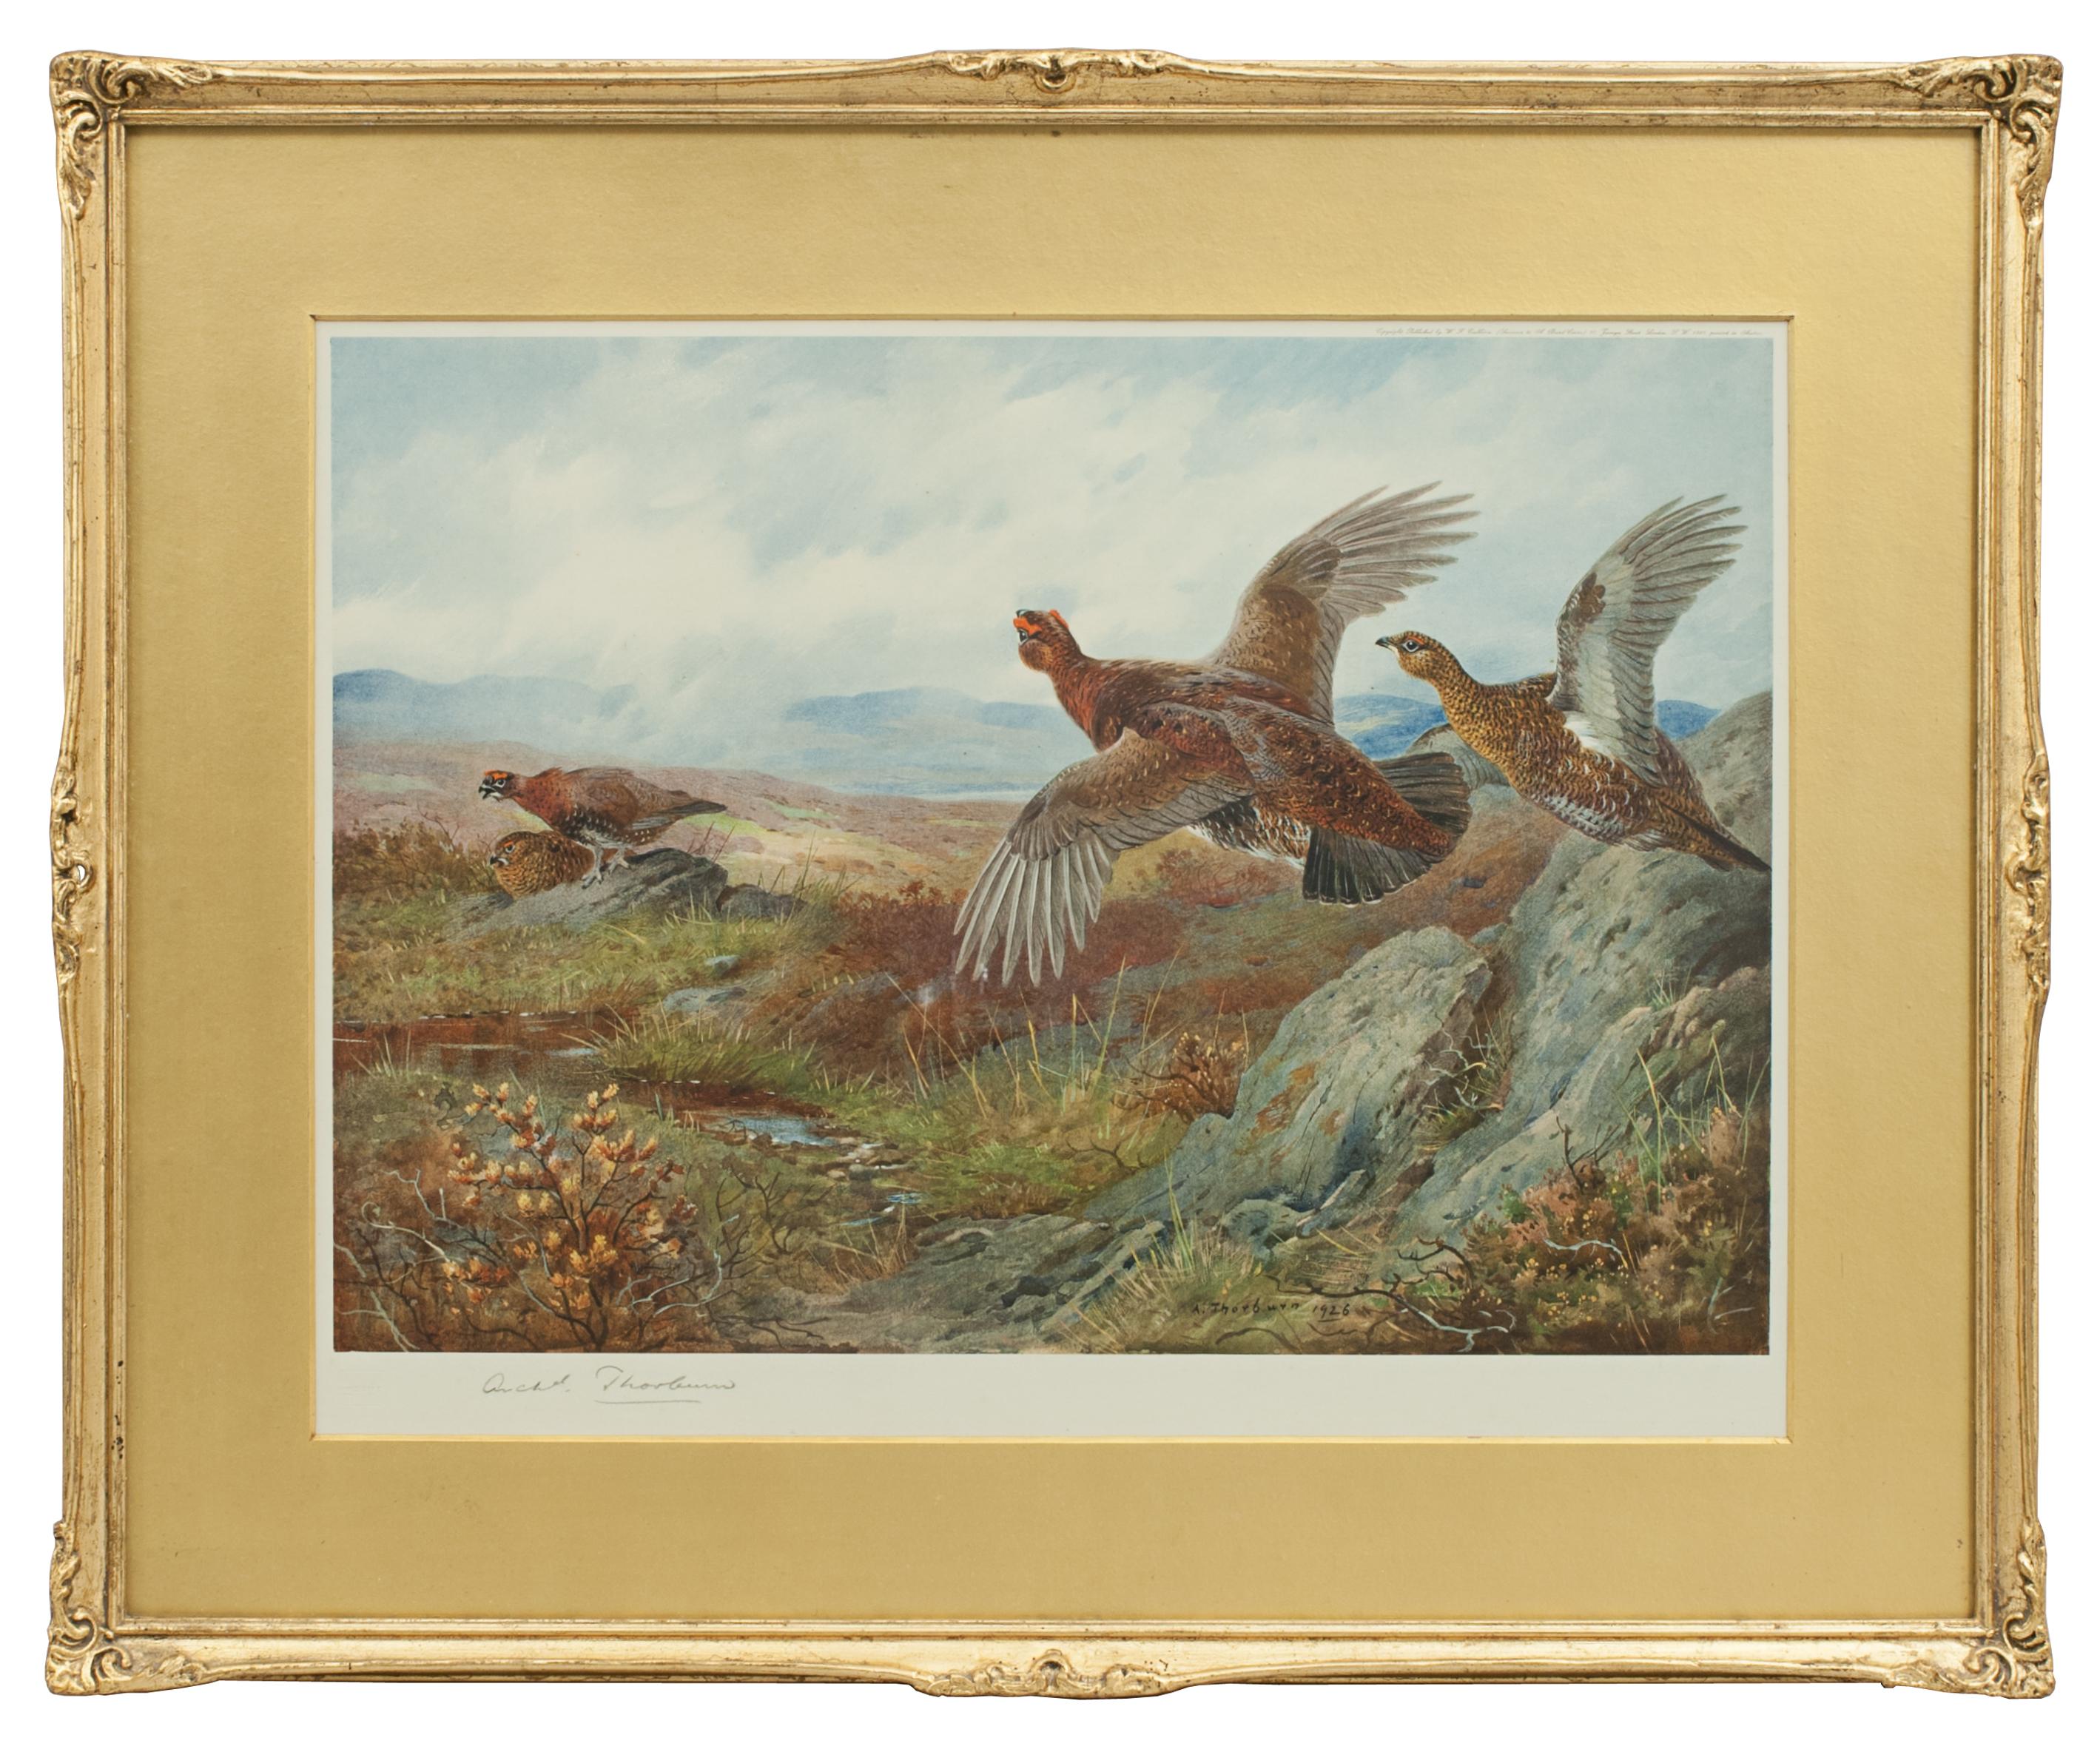 A game bird colotype print by Archibald Thorburn, titled 'Summer'. This is a single picture from a set of four called 'The Seasons'. Each season is represented by a bird, Partridge - Spring, Pheasant - Autumn, Grouse - Summer, Black Game - Winter.